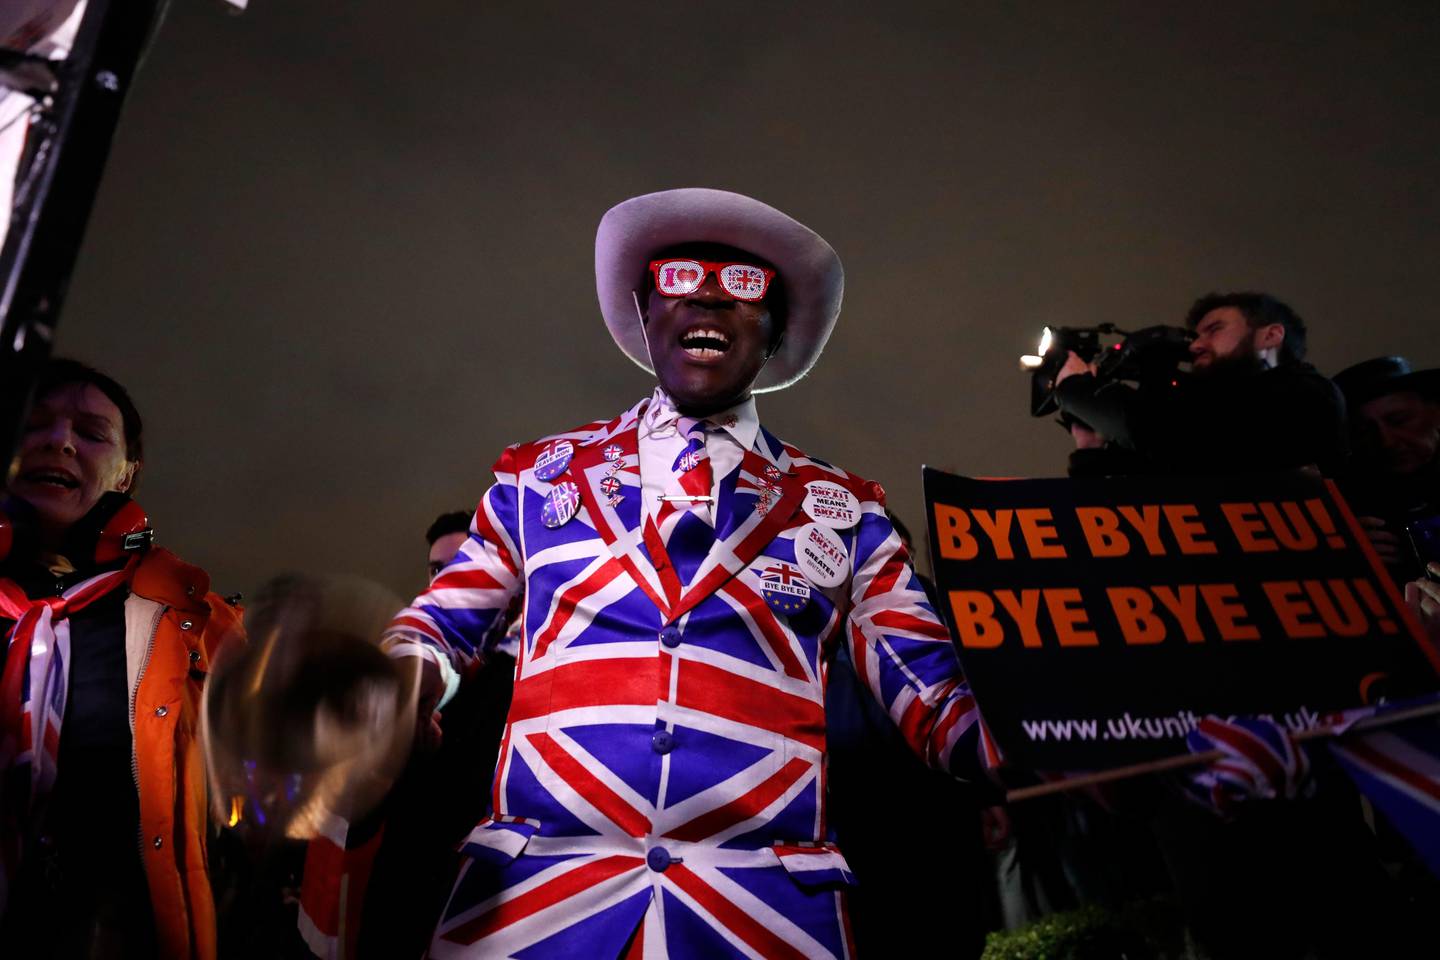 A Brexit supporter takes part in a rally during a rally at the Parliament square in London, Friday, Jan. 31, 2020. Britain officially leaves the European Union on Friday after a debilitating political period that has bitterly divided the nation since the 2016 Brexit referendum. (AP Photo/Frank Augstein)